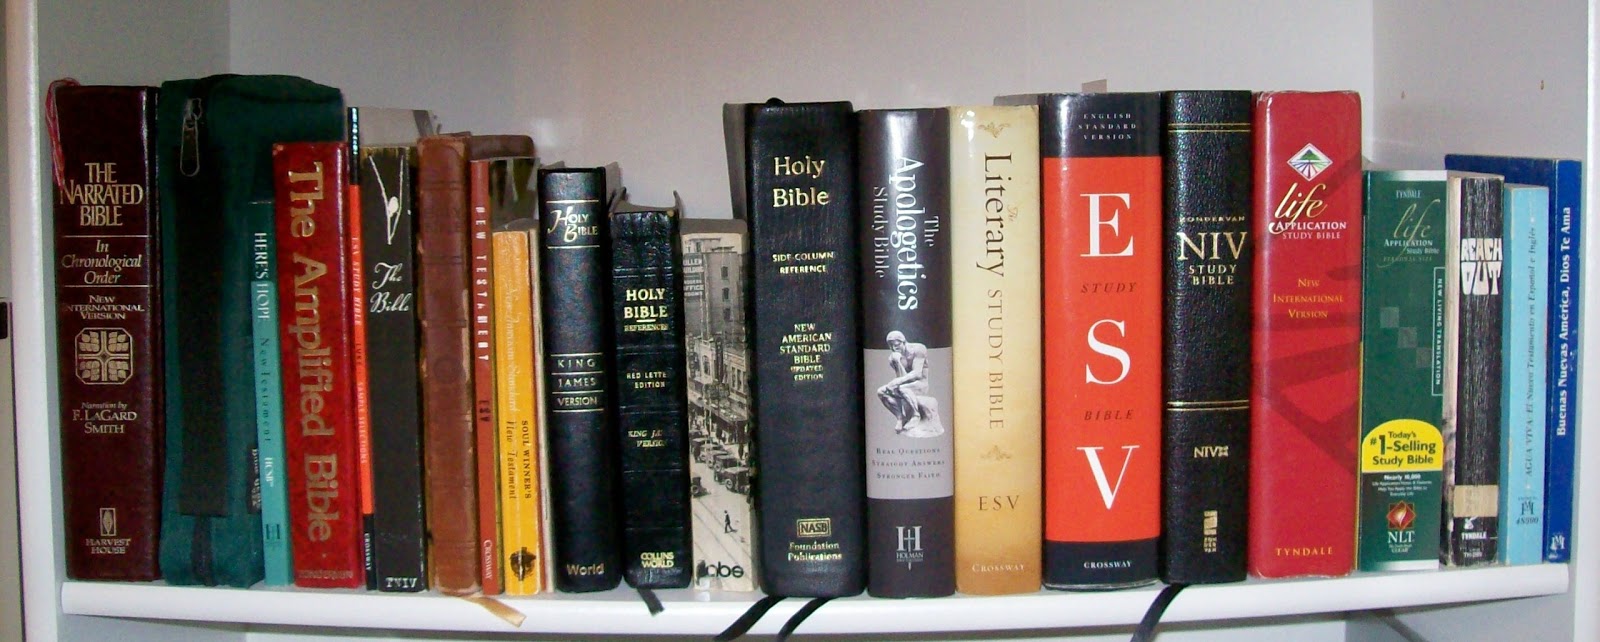 Bookshelf with many Bibles on it